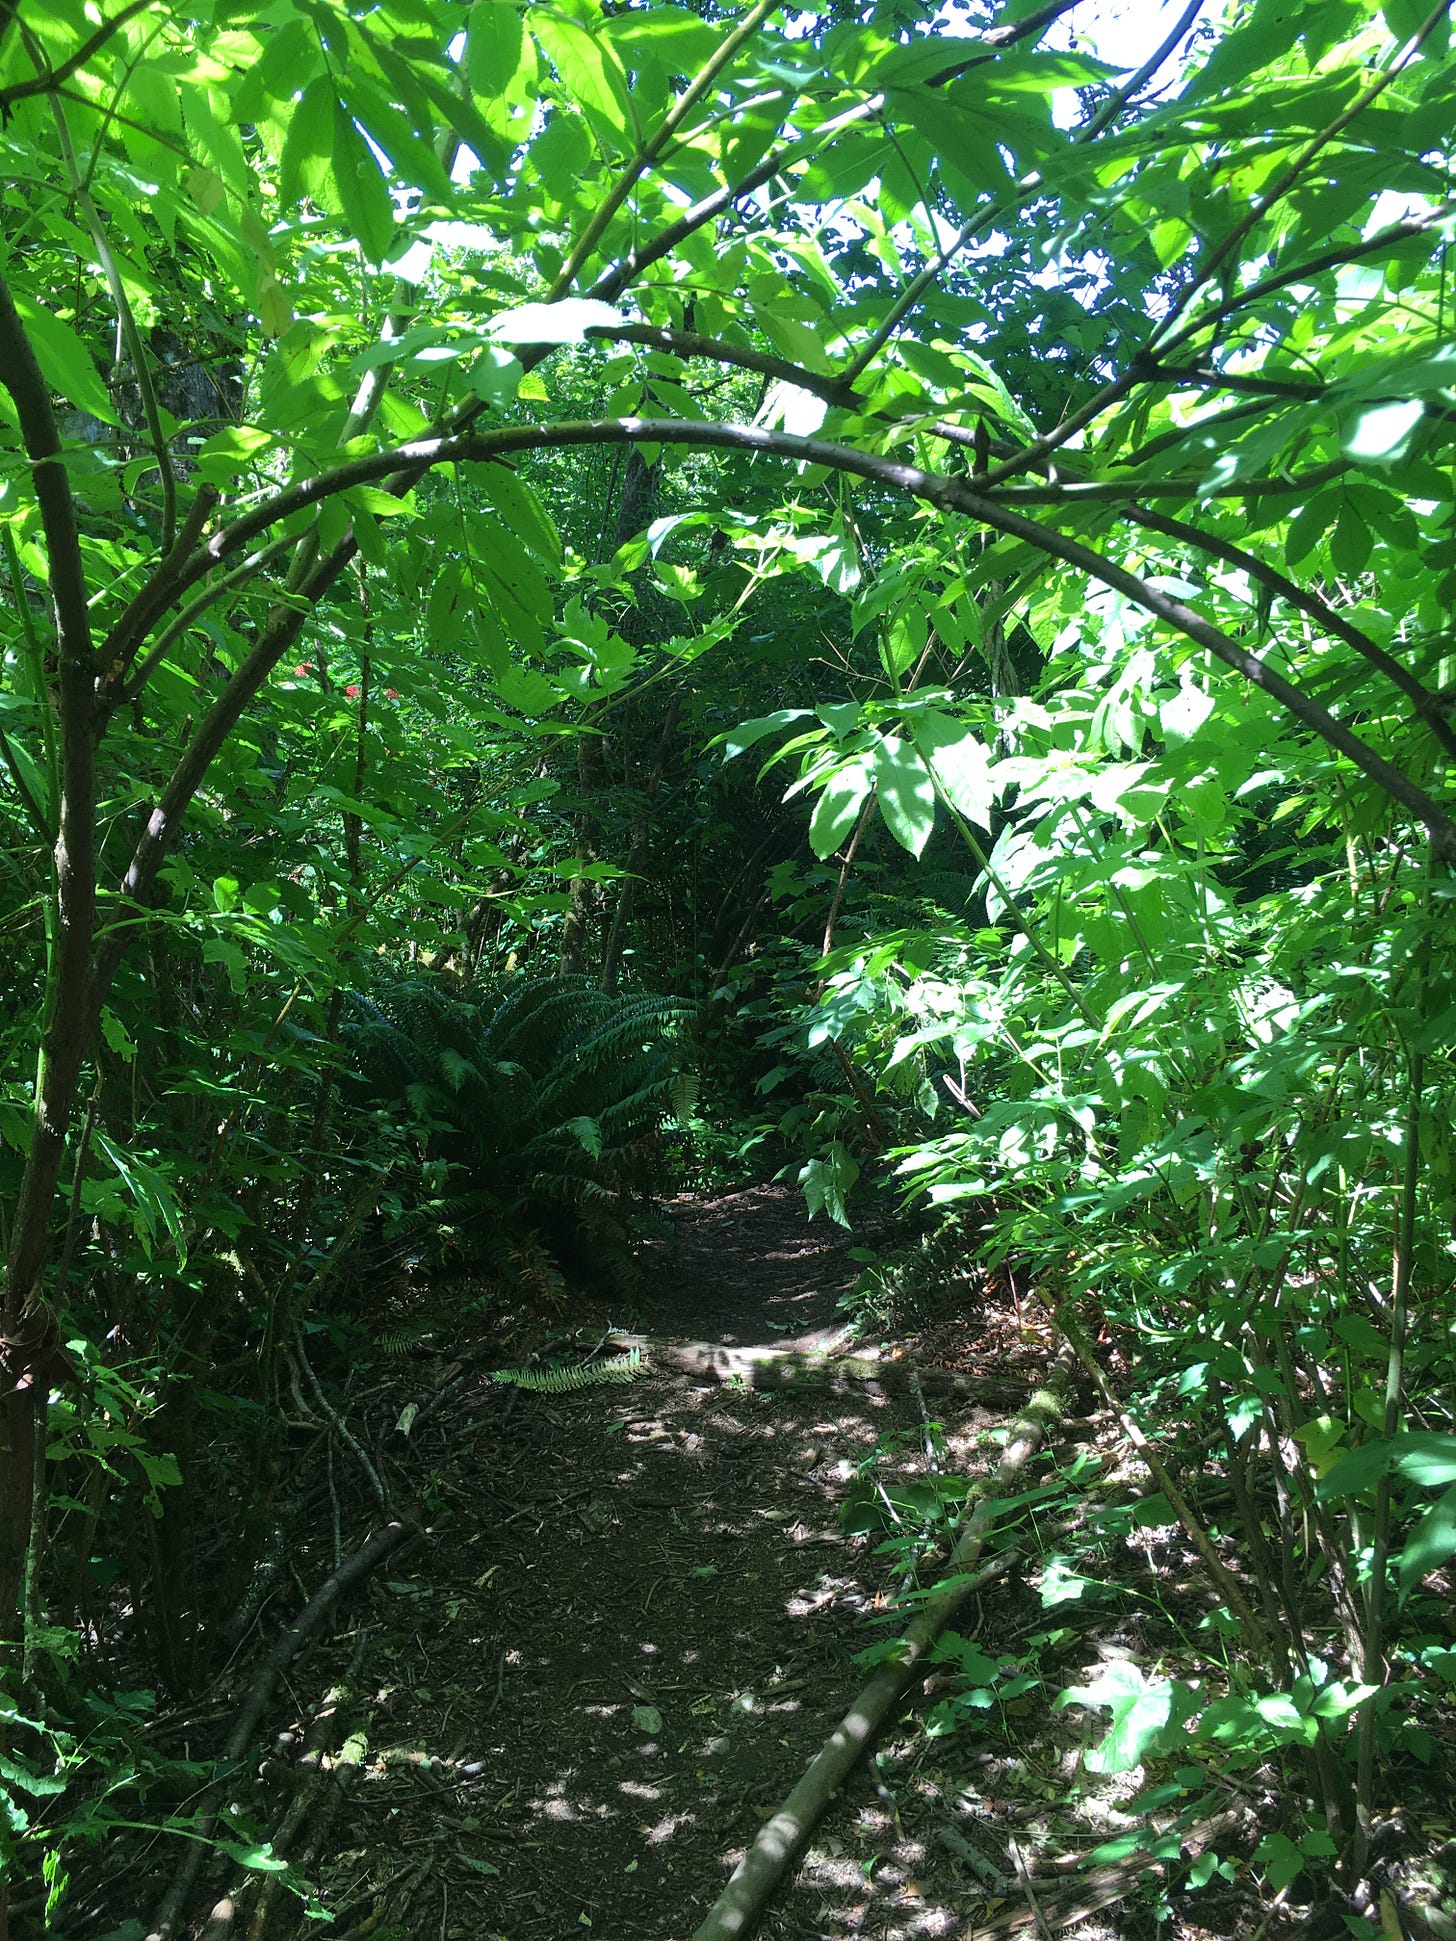 green growth on branches! green ferns and a brown dirt path with a tender natural archway over the path close to the camera. sunlight shining through openings.